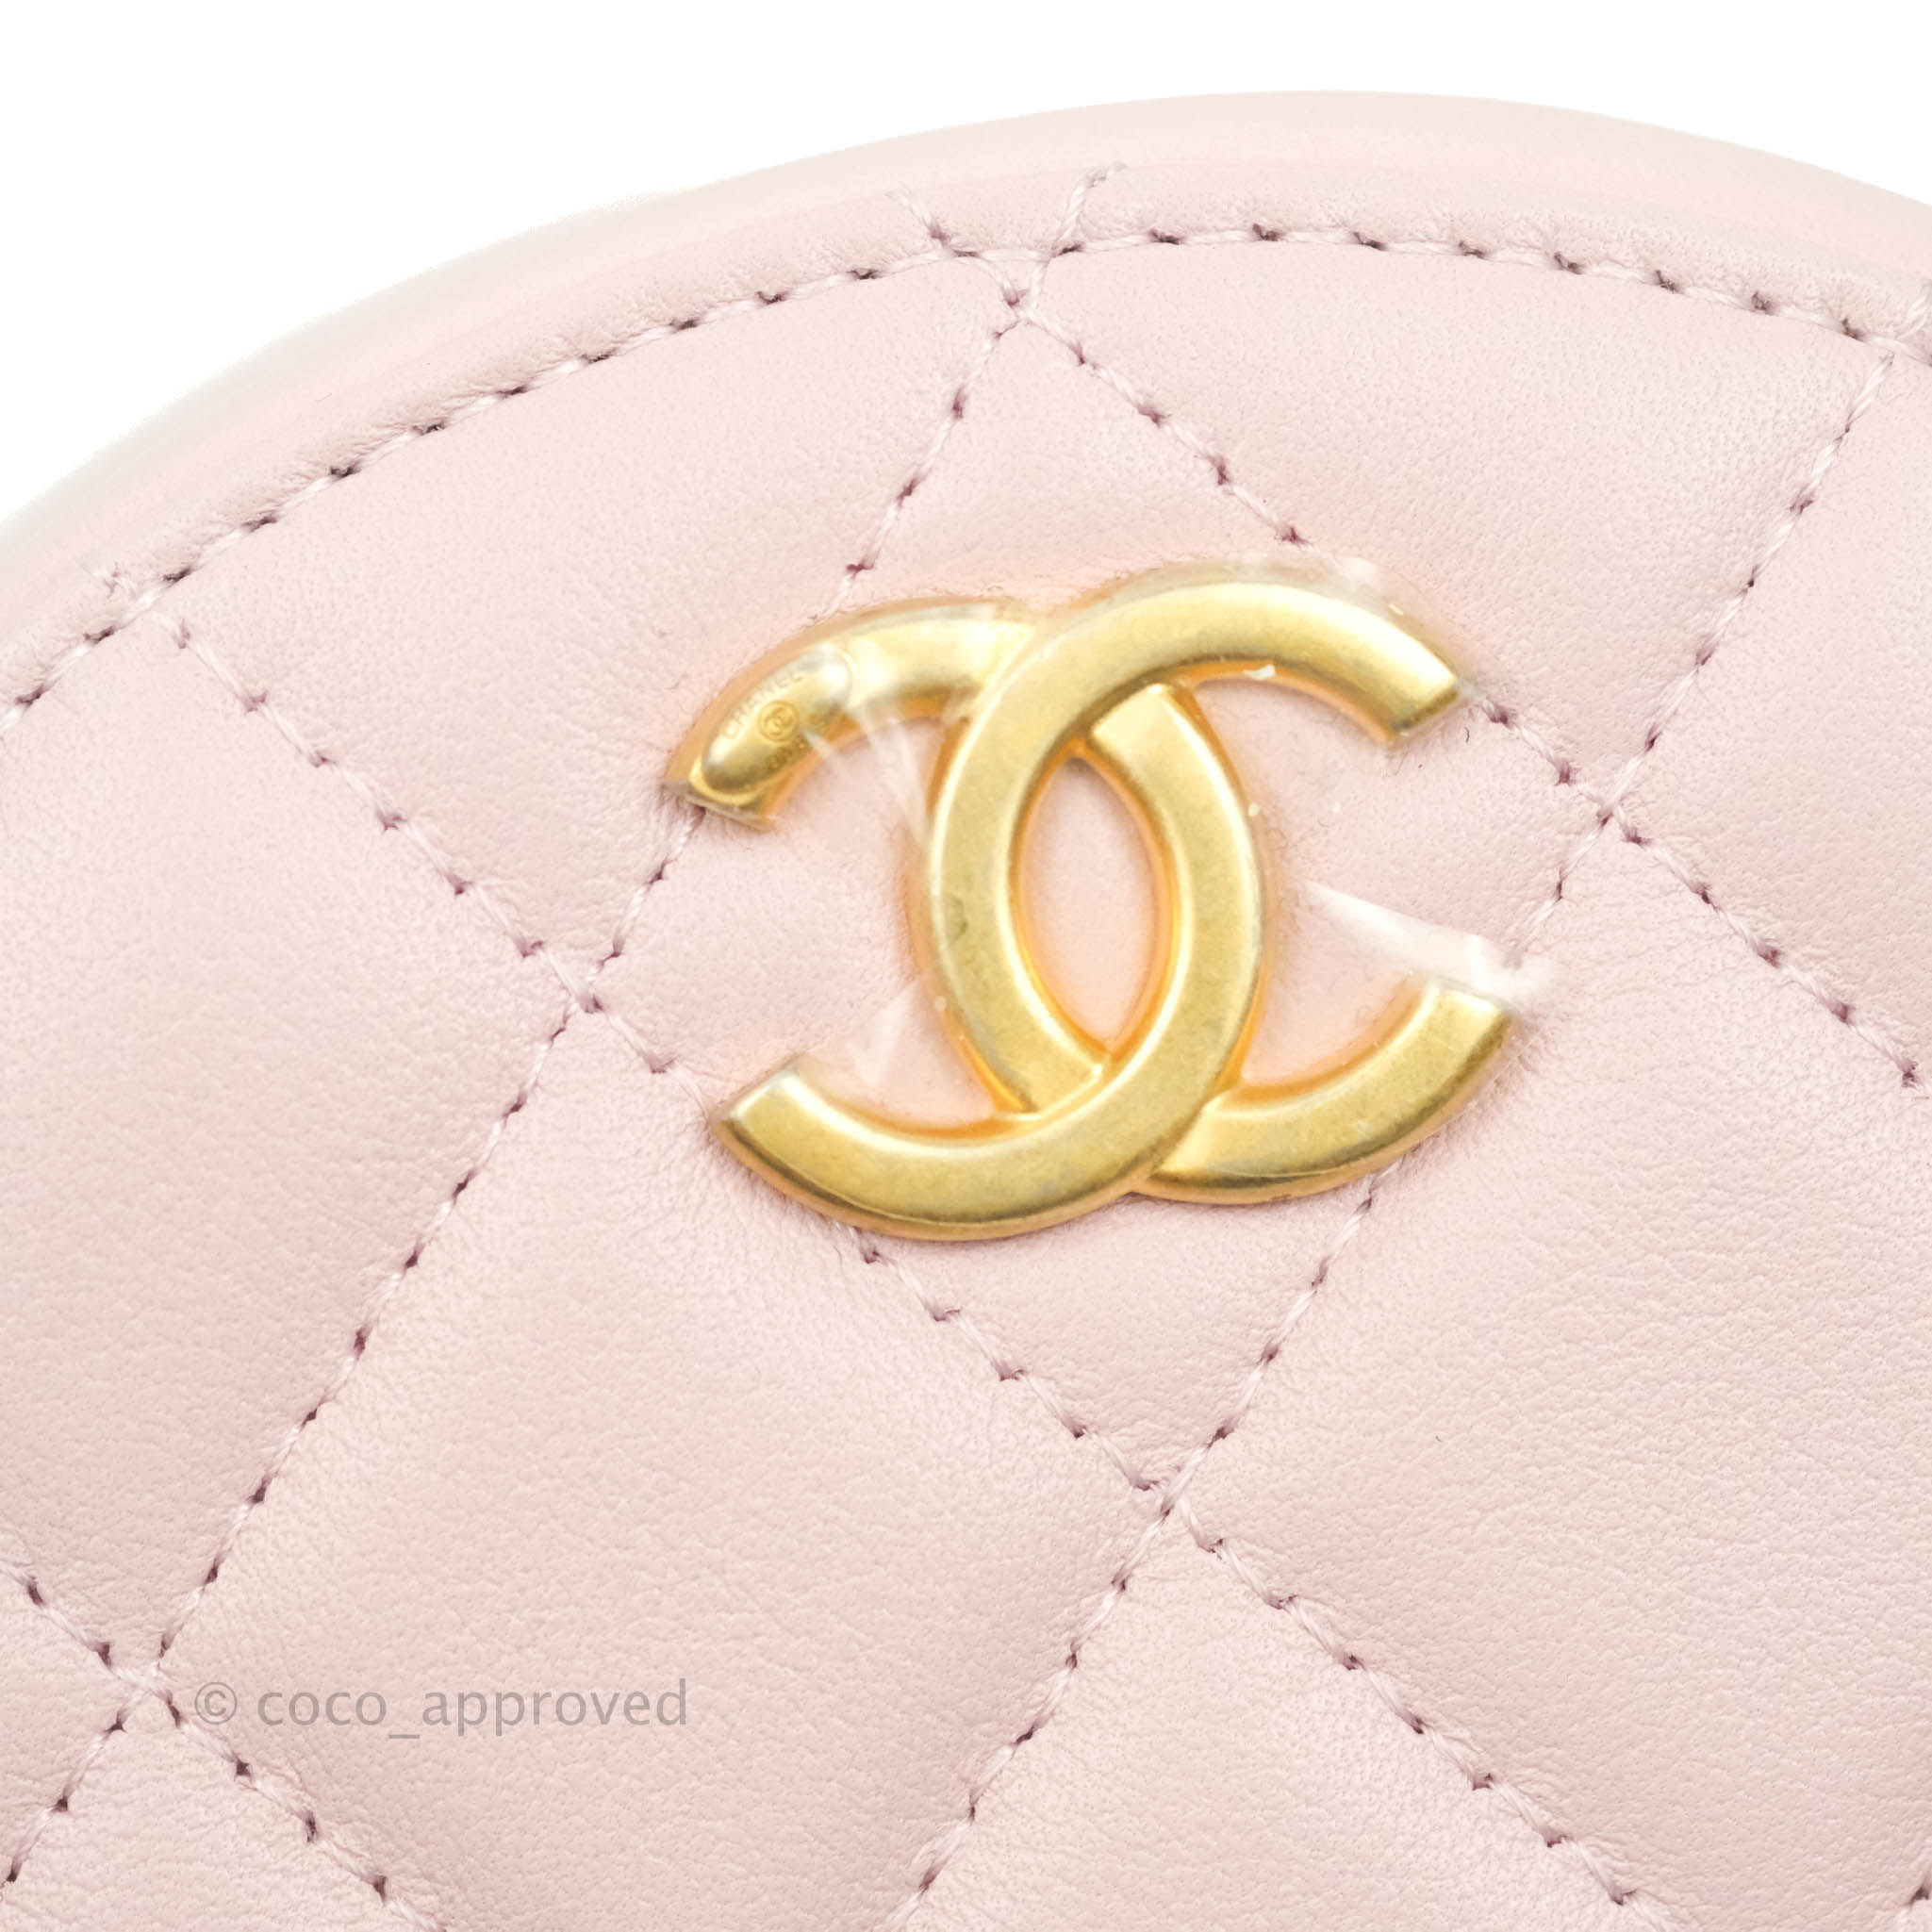 Chanel Clutch with Chain AP3010 B09158 NK343, Pink, One Size